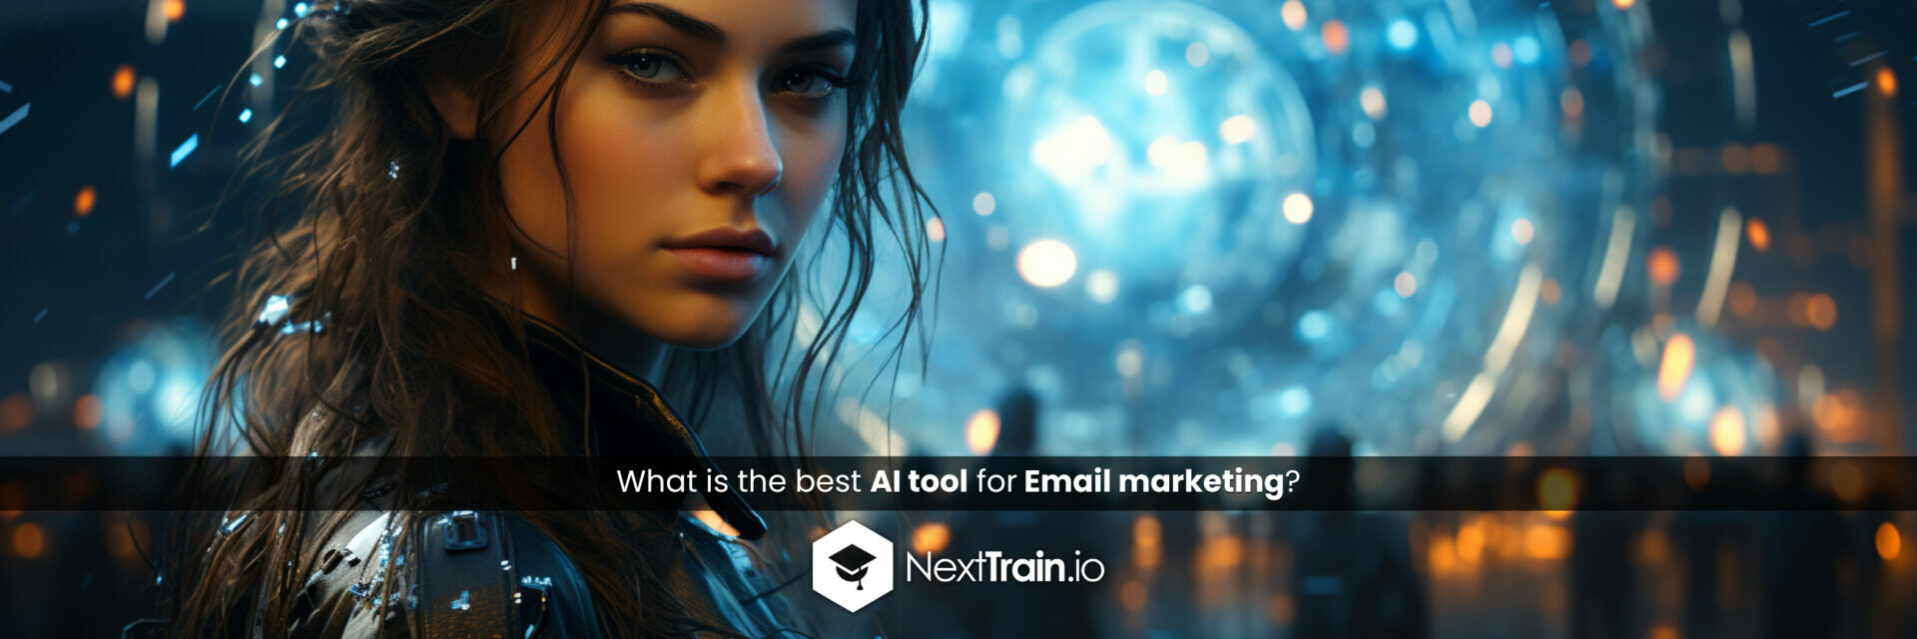 What is the best AI tool for Email marketing?